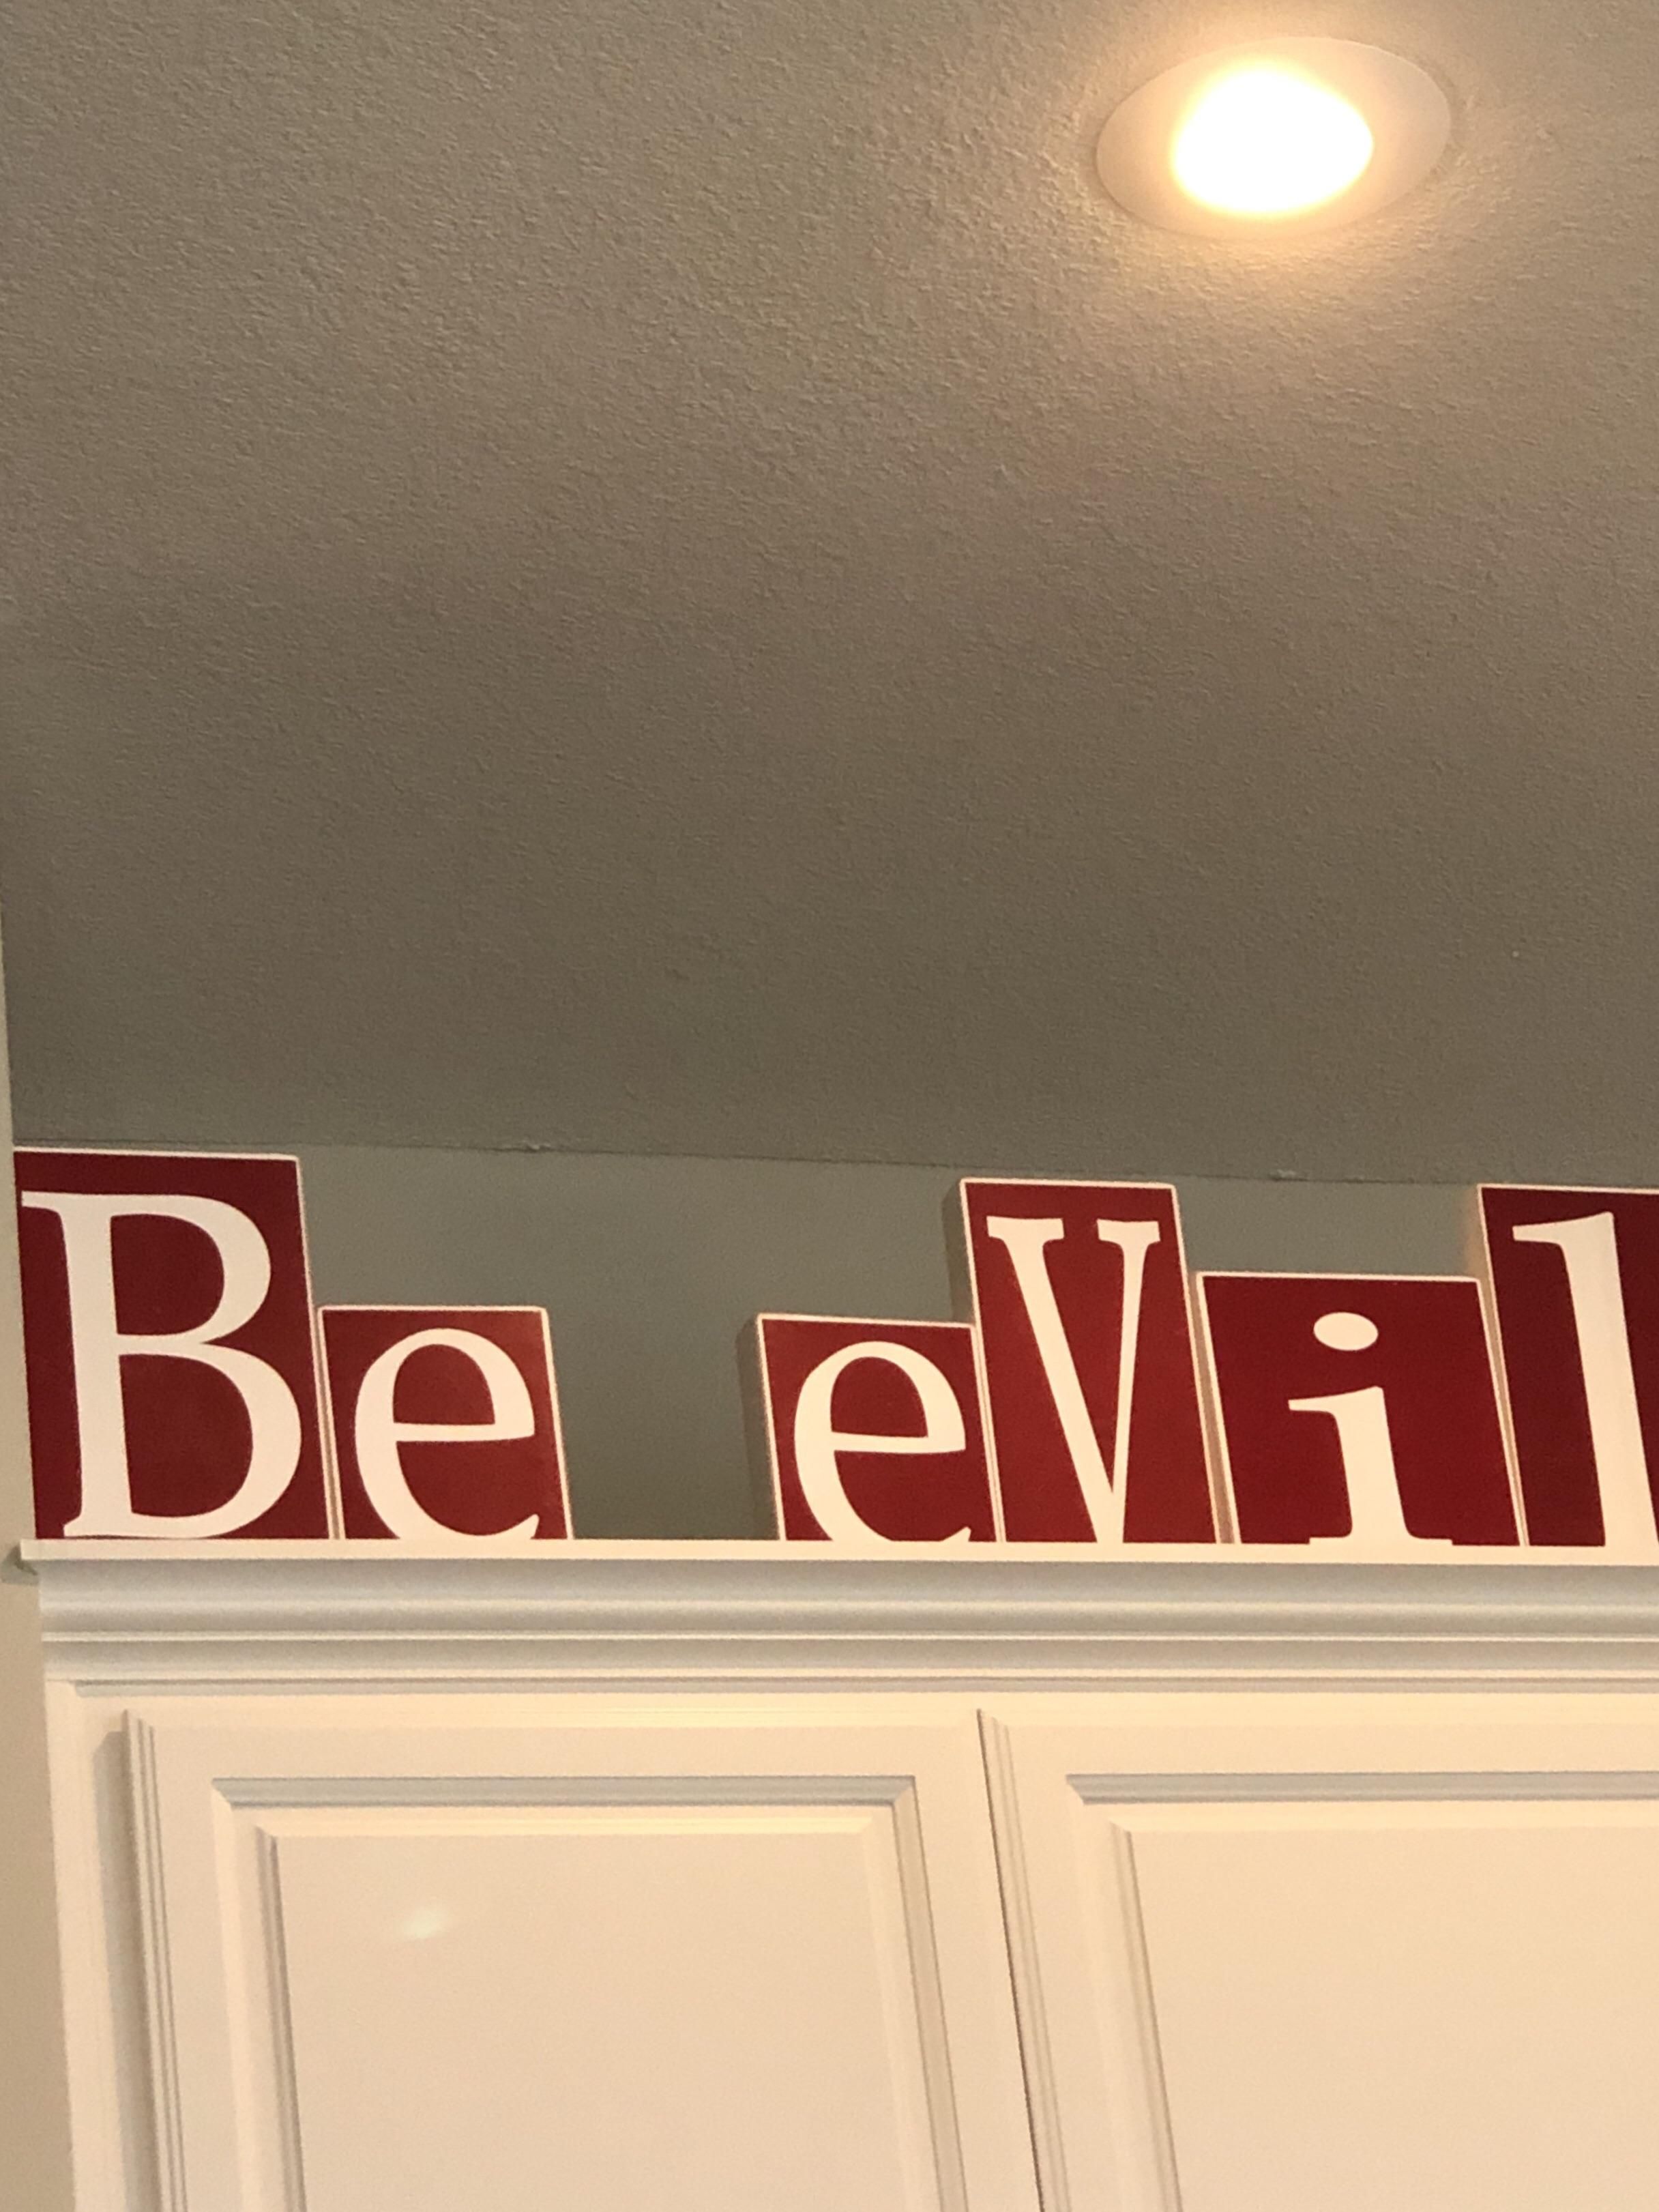 Rearranged the in-law’s “Believe” blocks and no one has noticed.